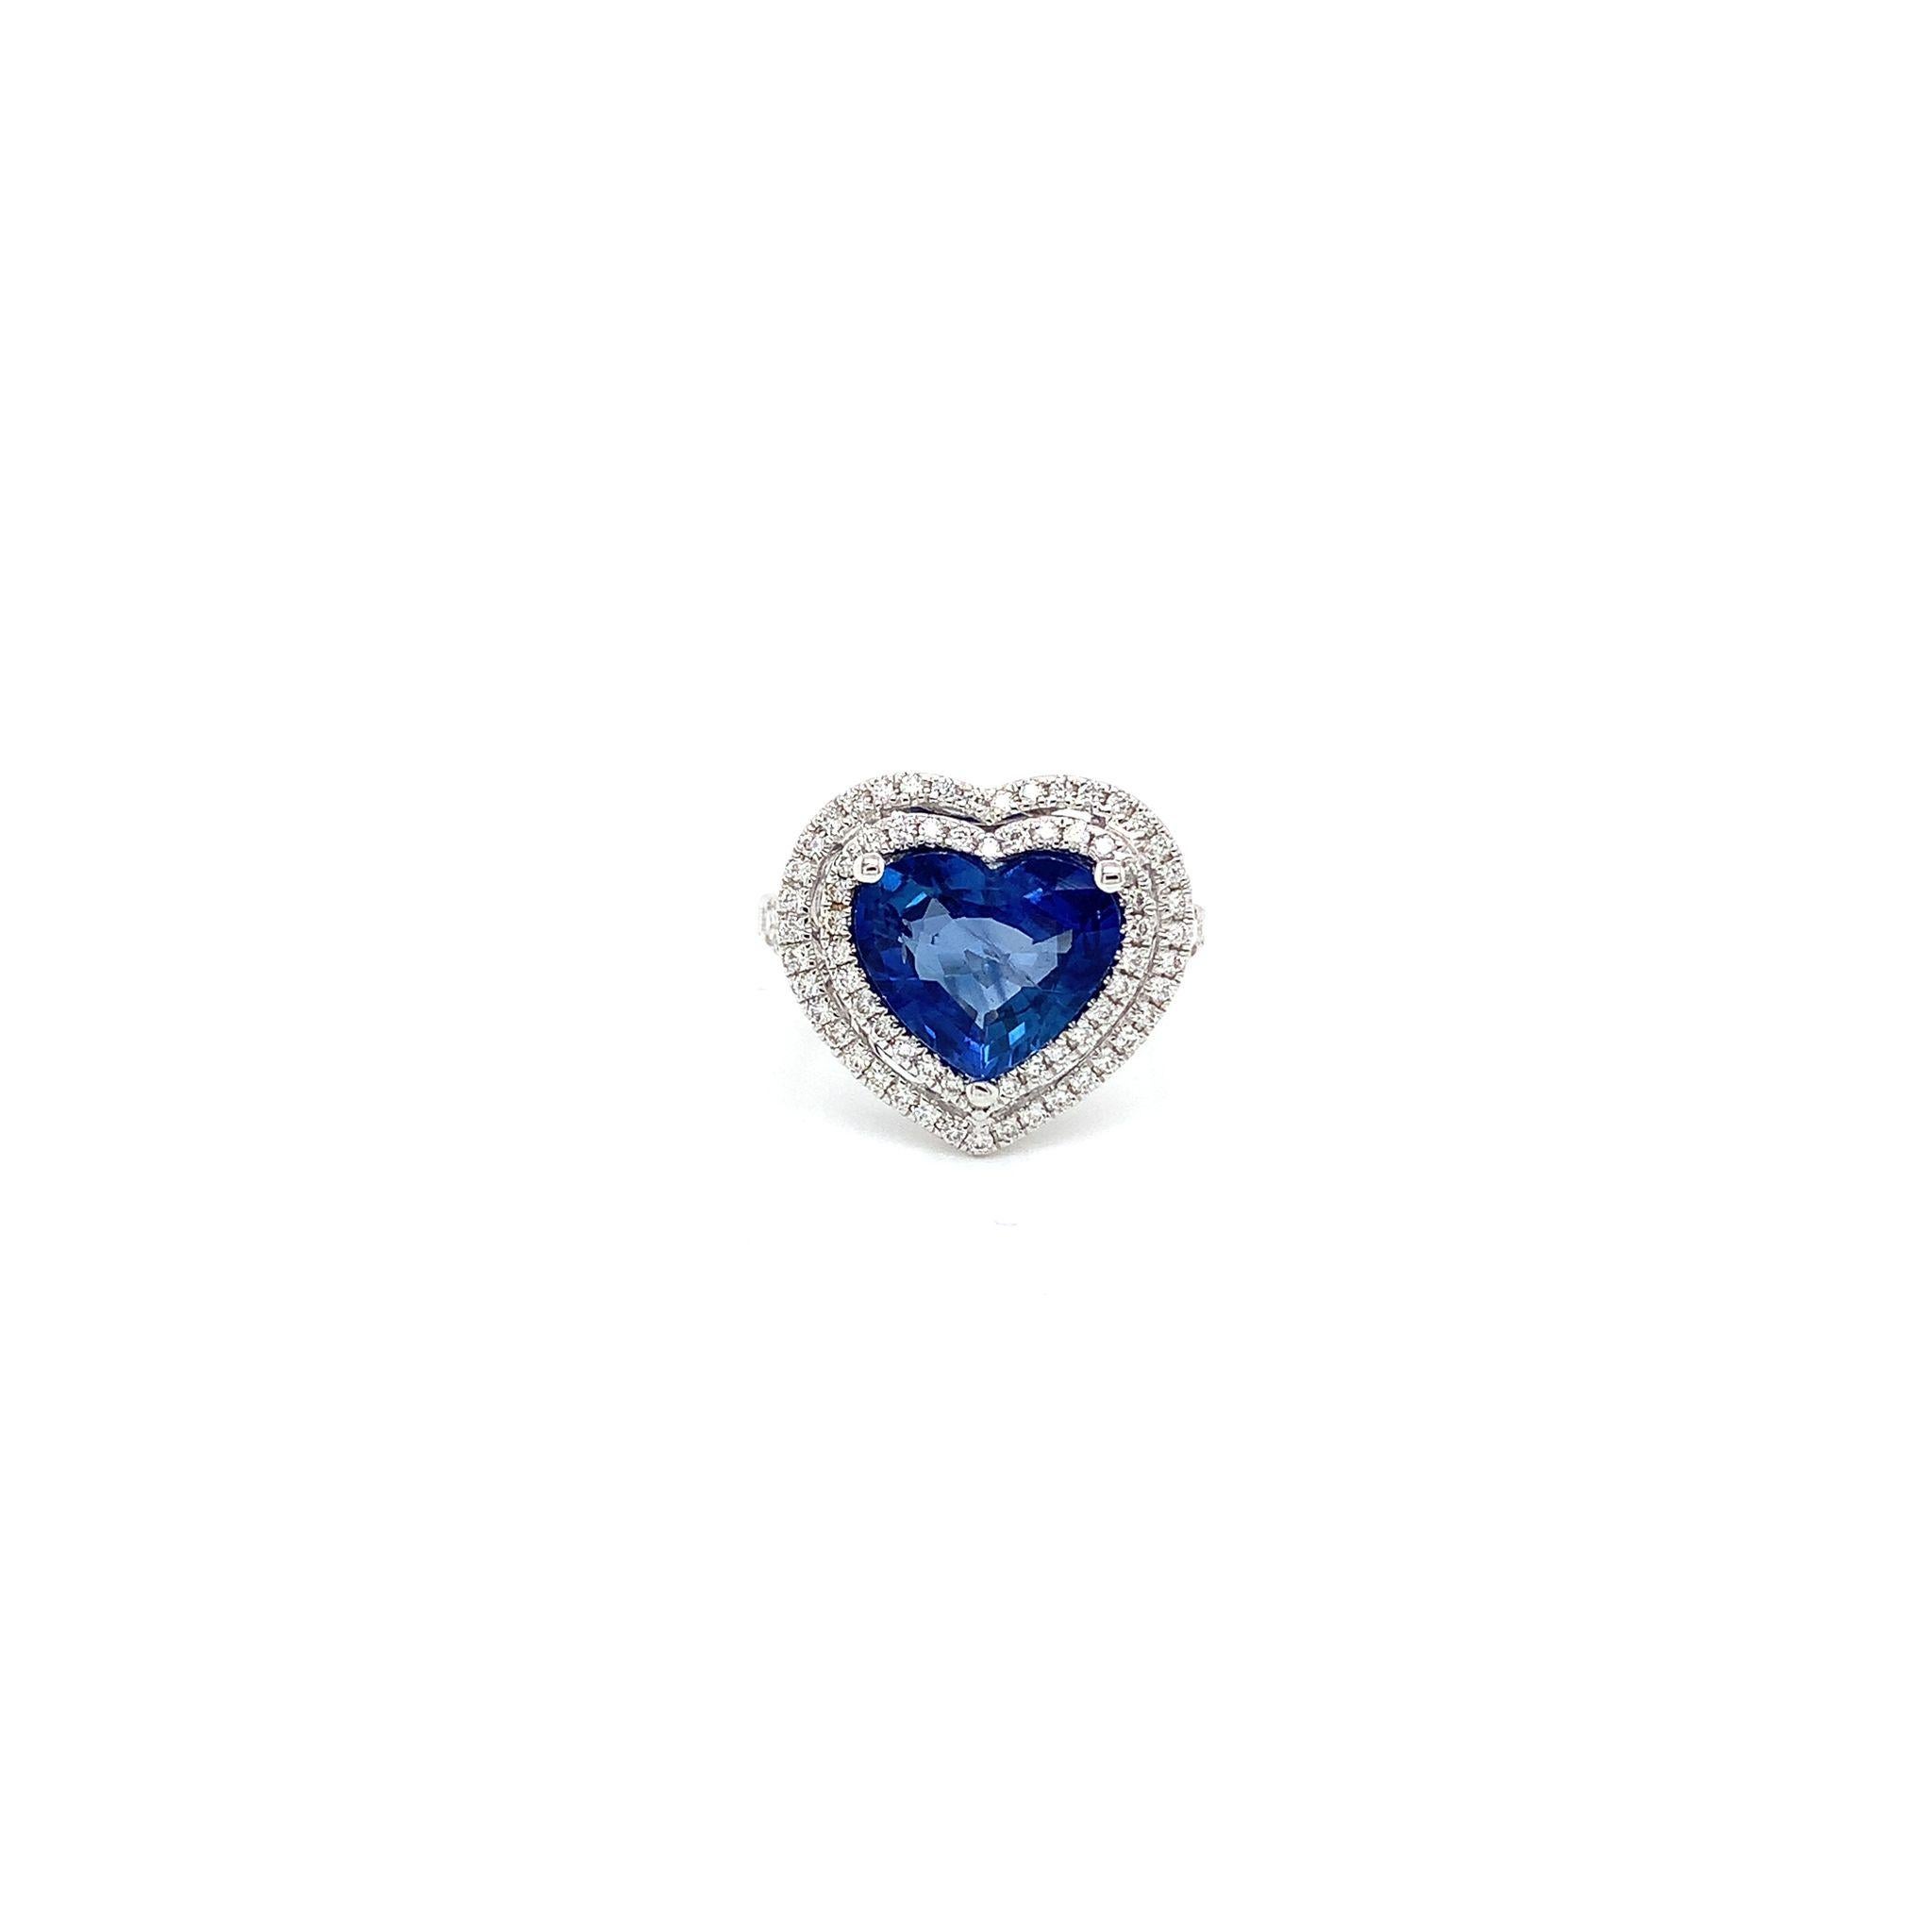 Certified 3.58 ct heart shape Ceylon Sapphire
Measuring (9.44x10.92) mm
99 pieces of round diamonds weighing .51 cts
Set in 18K white gold ring
weighing 5.27 grams